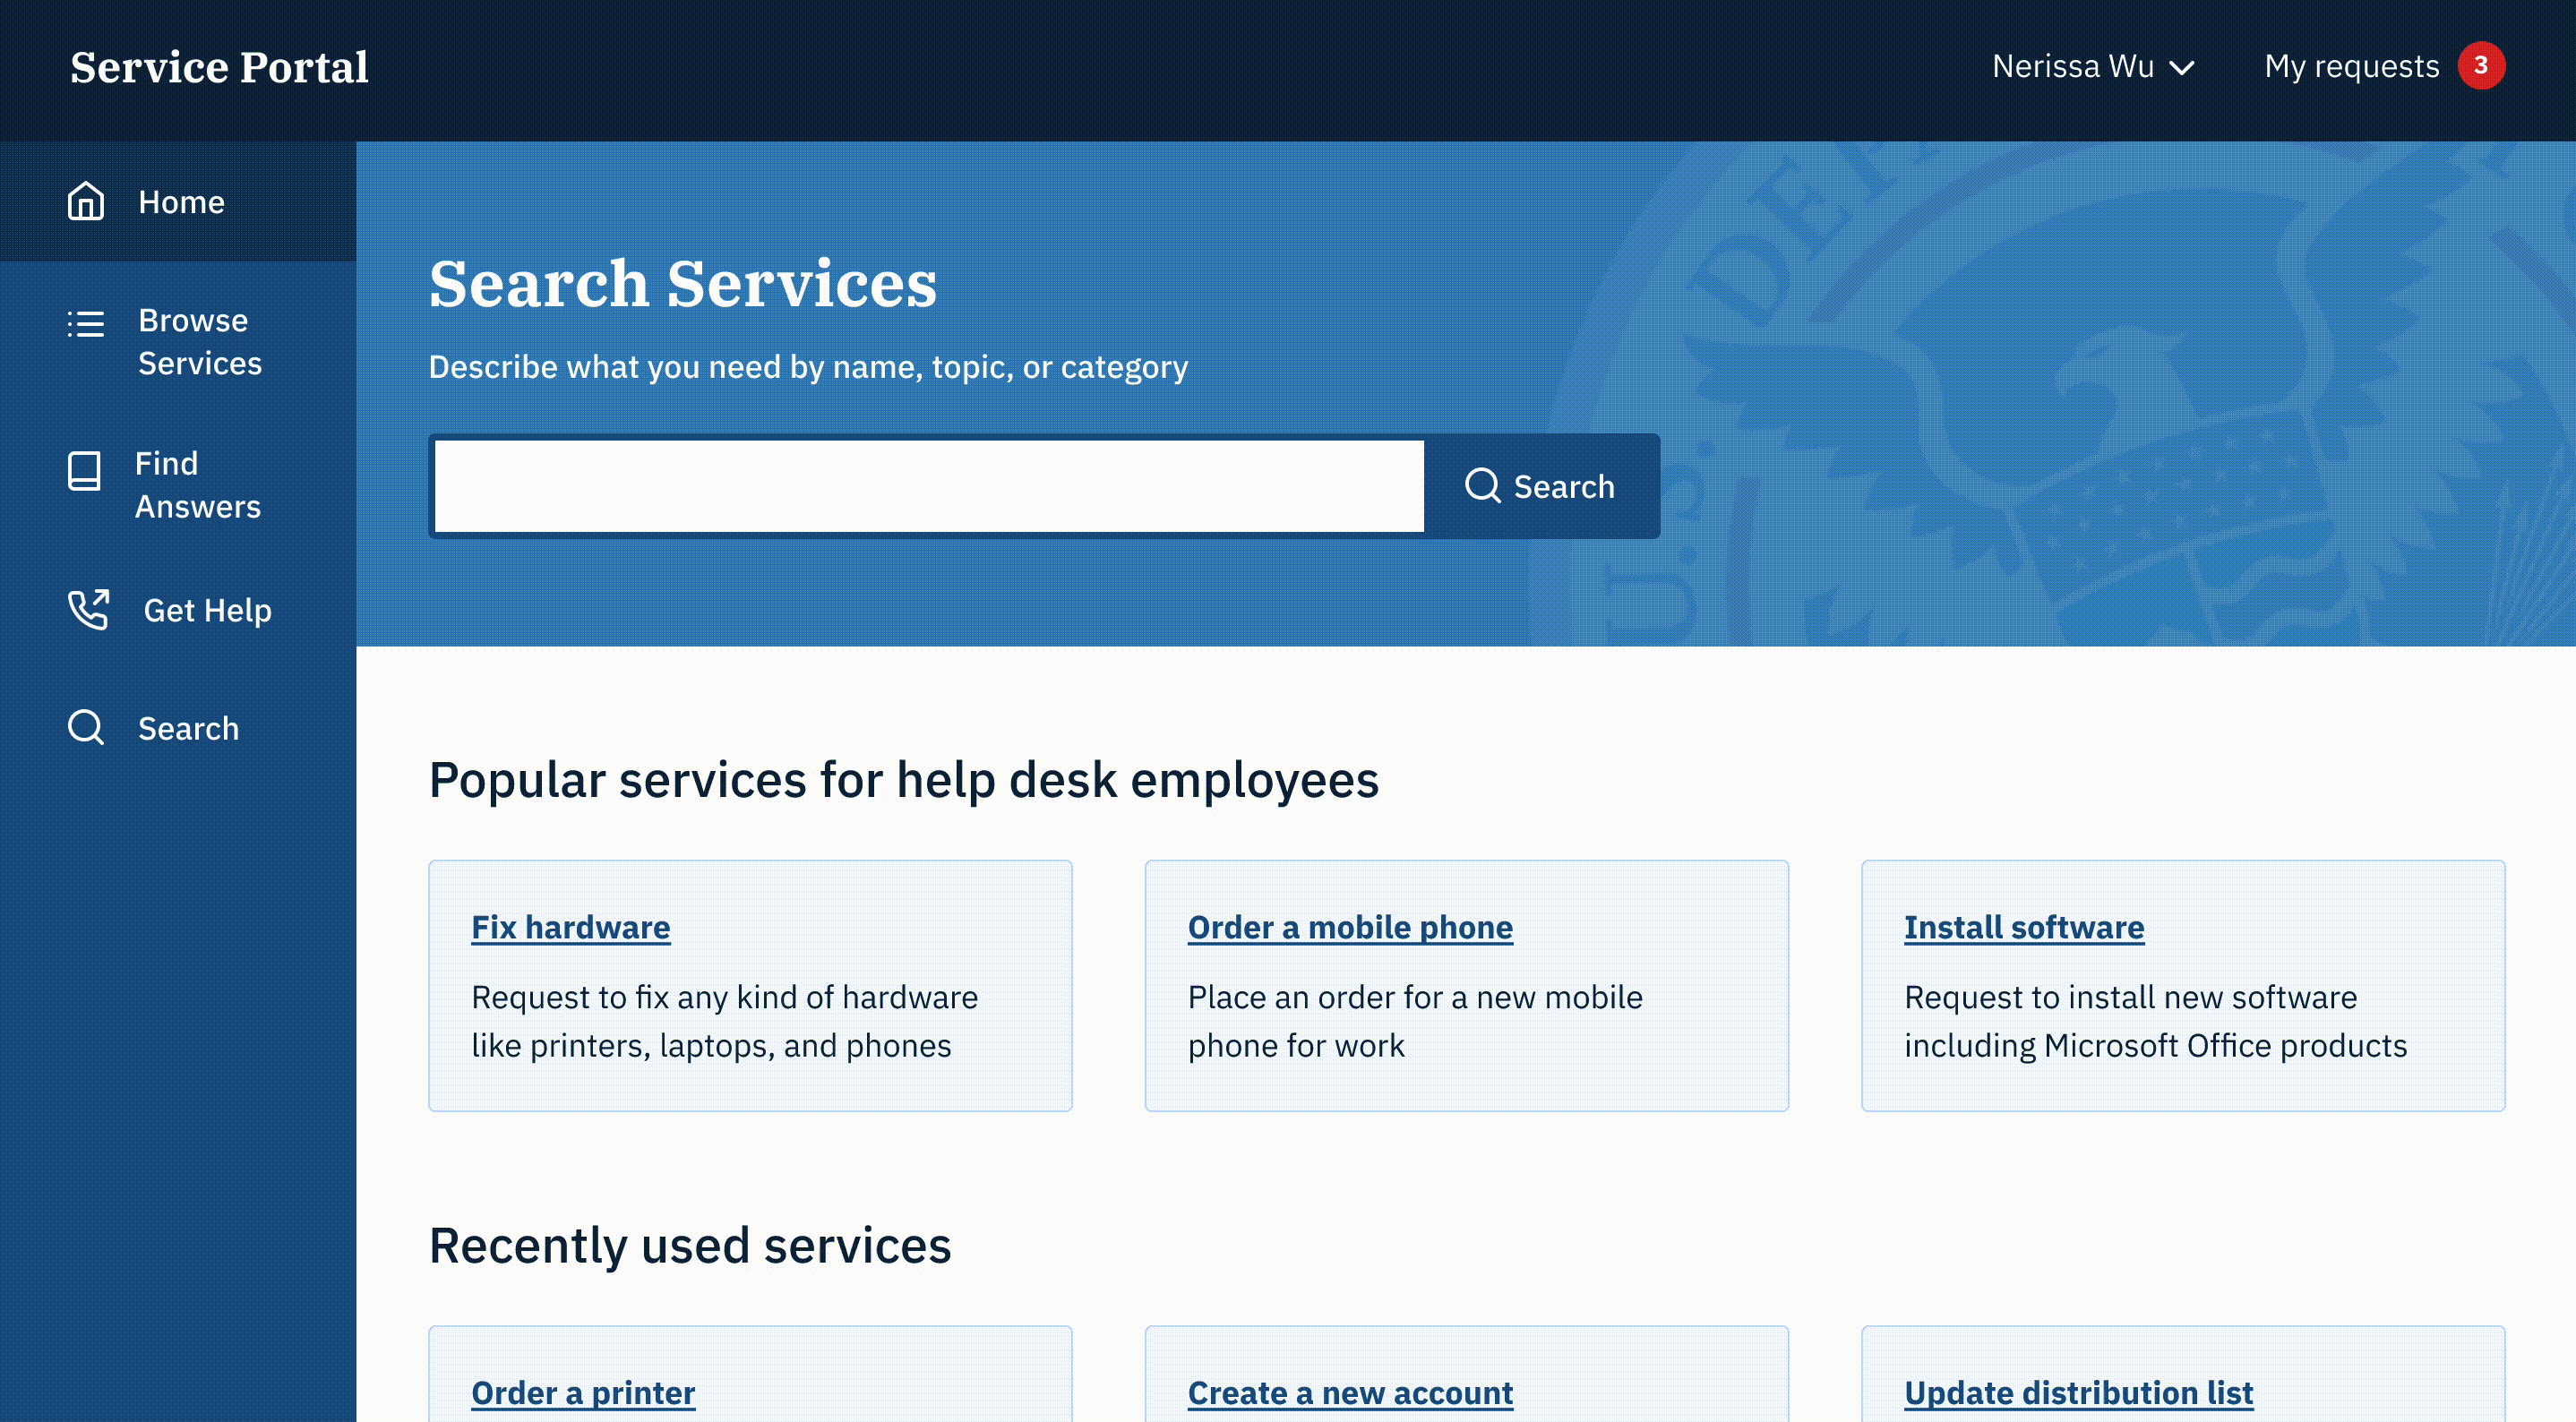 A service portal featuring tab navigation with a search bar, a section for popular services, and a section for recently used services.